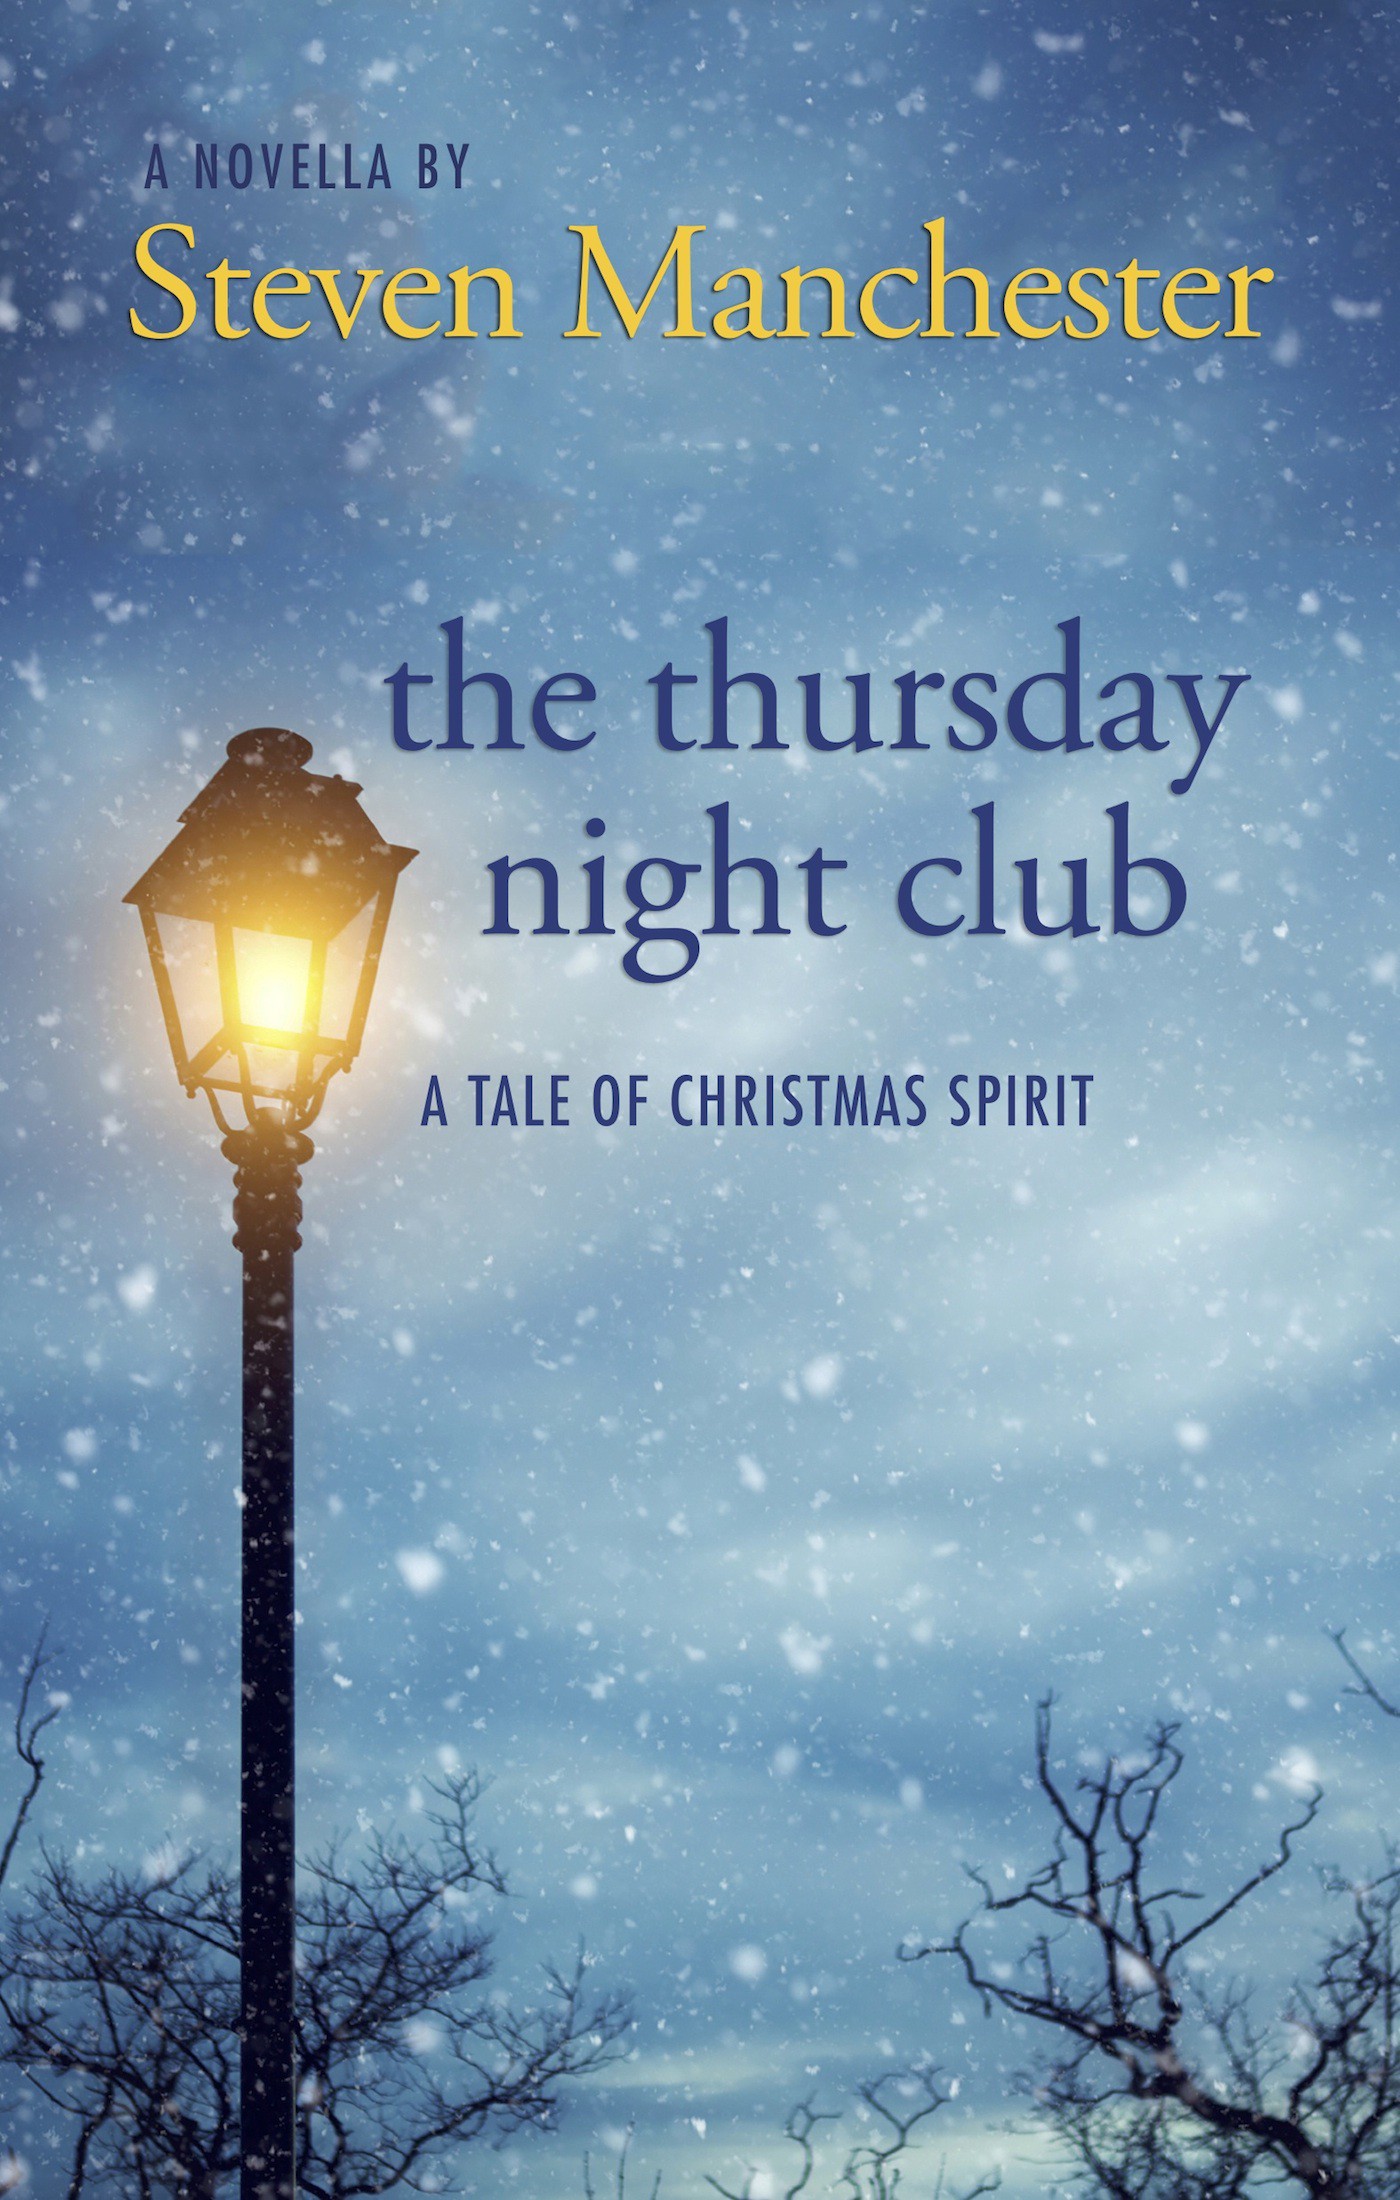 The Thursday Night Club by Steven Manchester